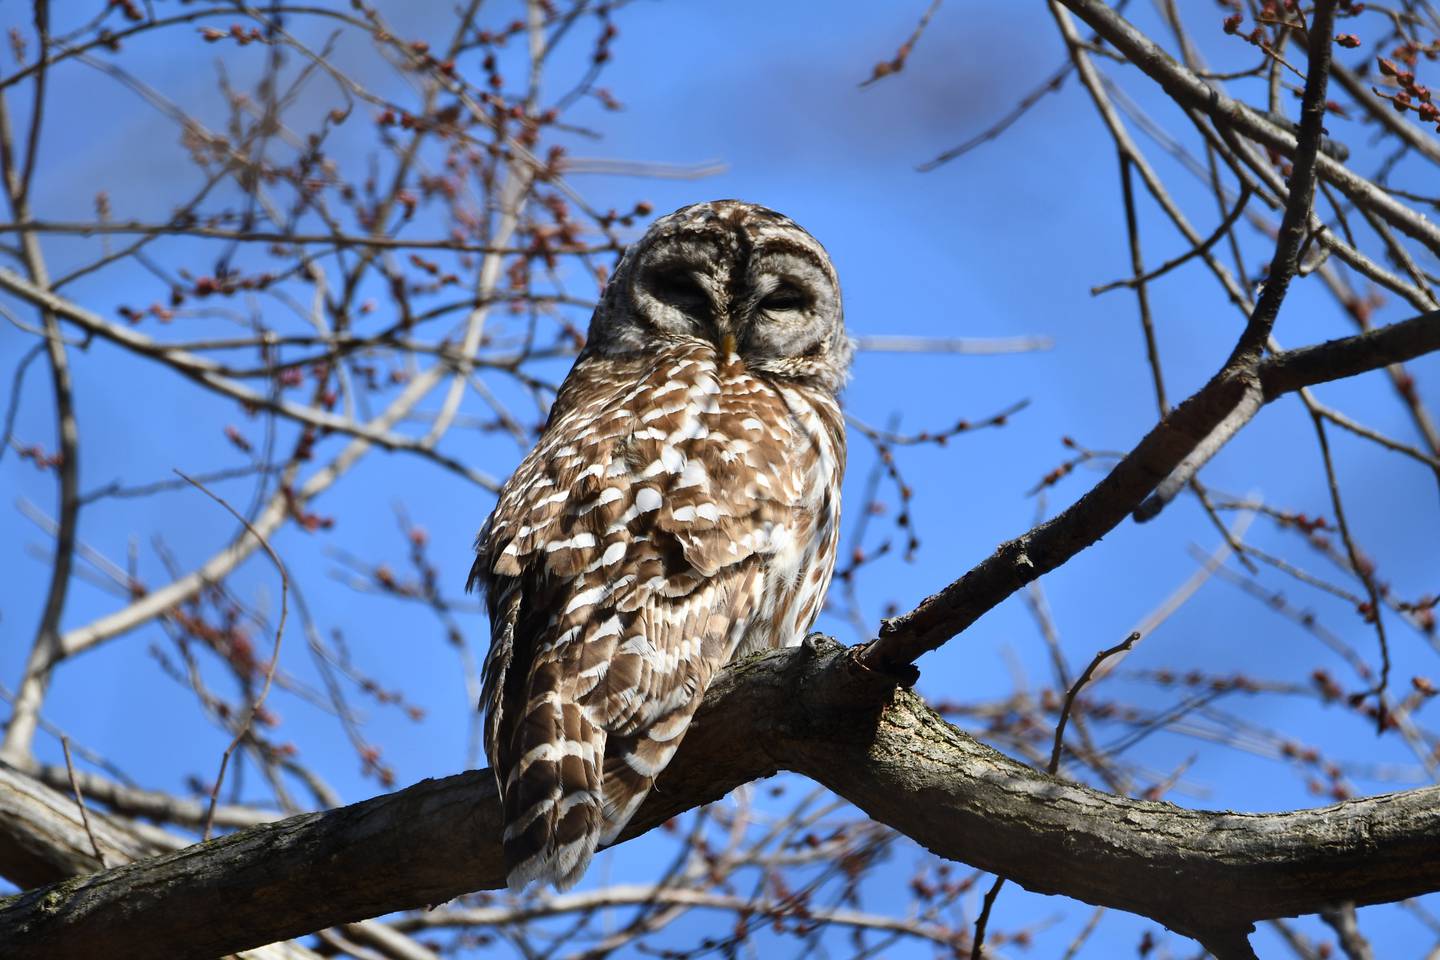 Learn more about owls by registering for a free Forest Preserve District of Will County owl hike in December.